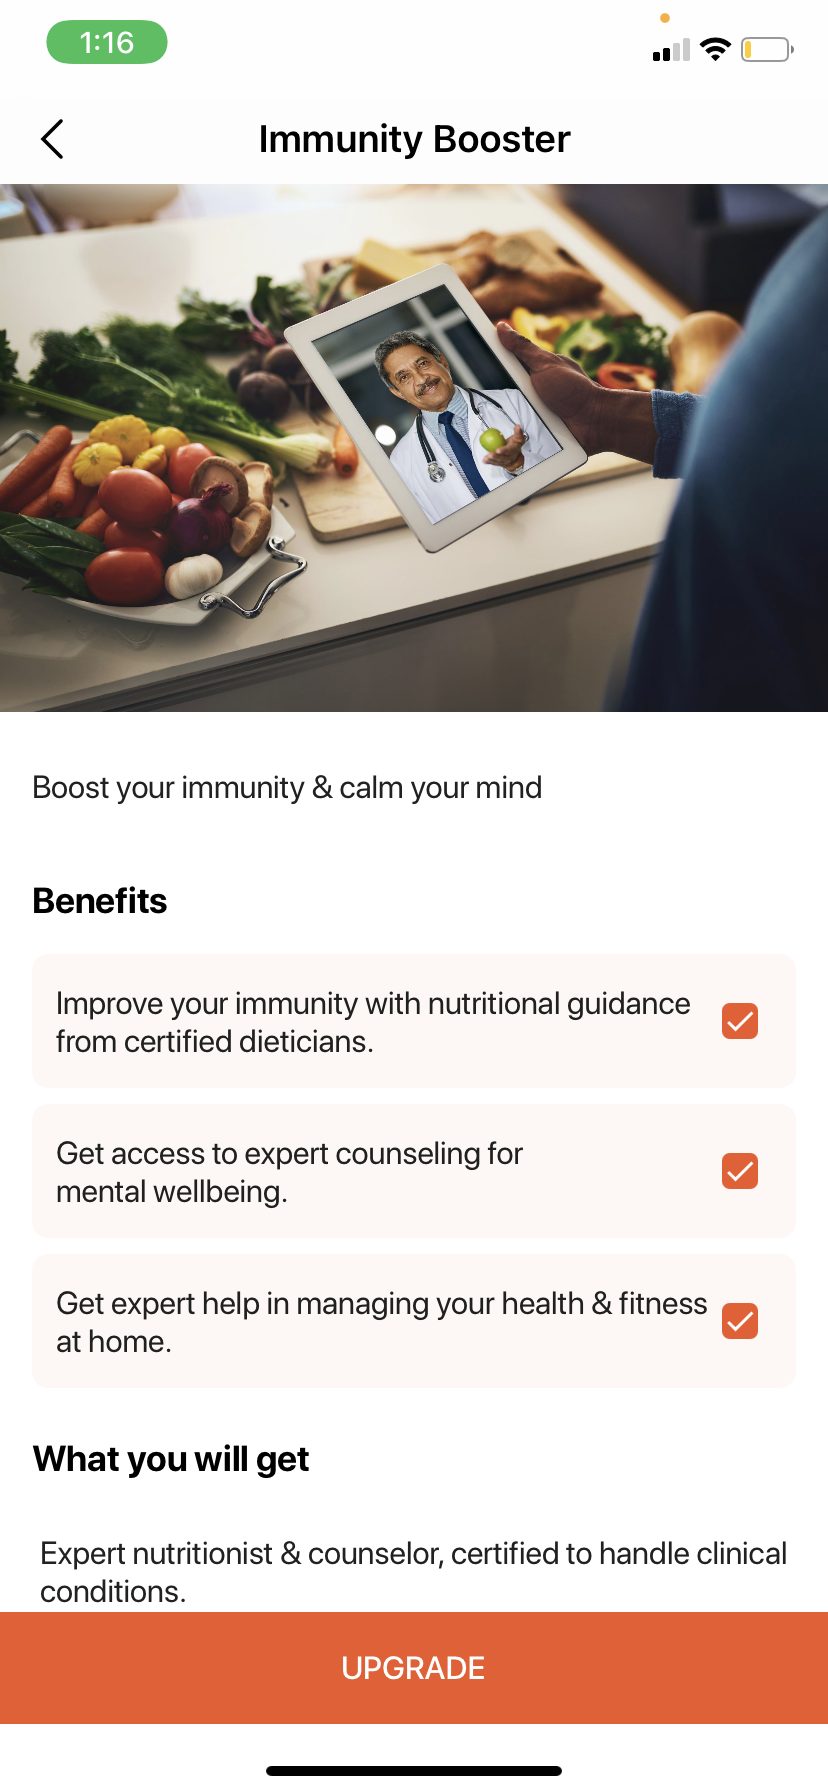 home-quarantine-care-program-by-reach-wellbeing-app-to-help-enhance-immunity-and-manage-stress